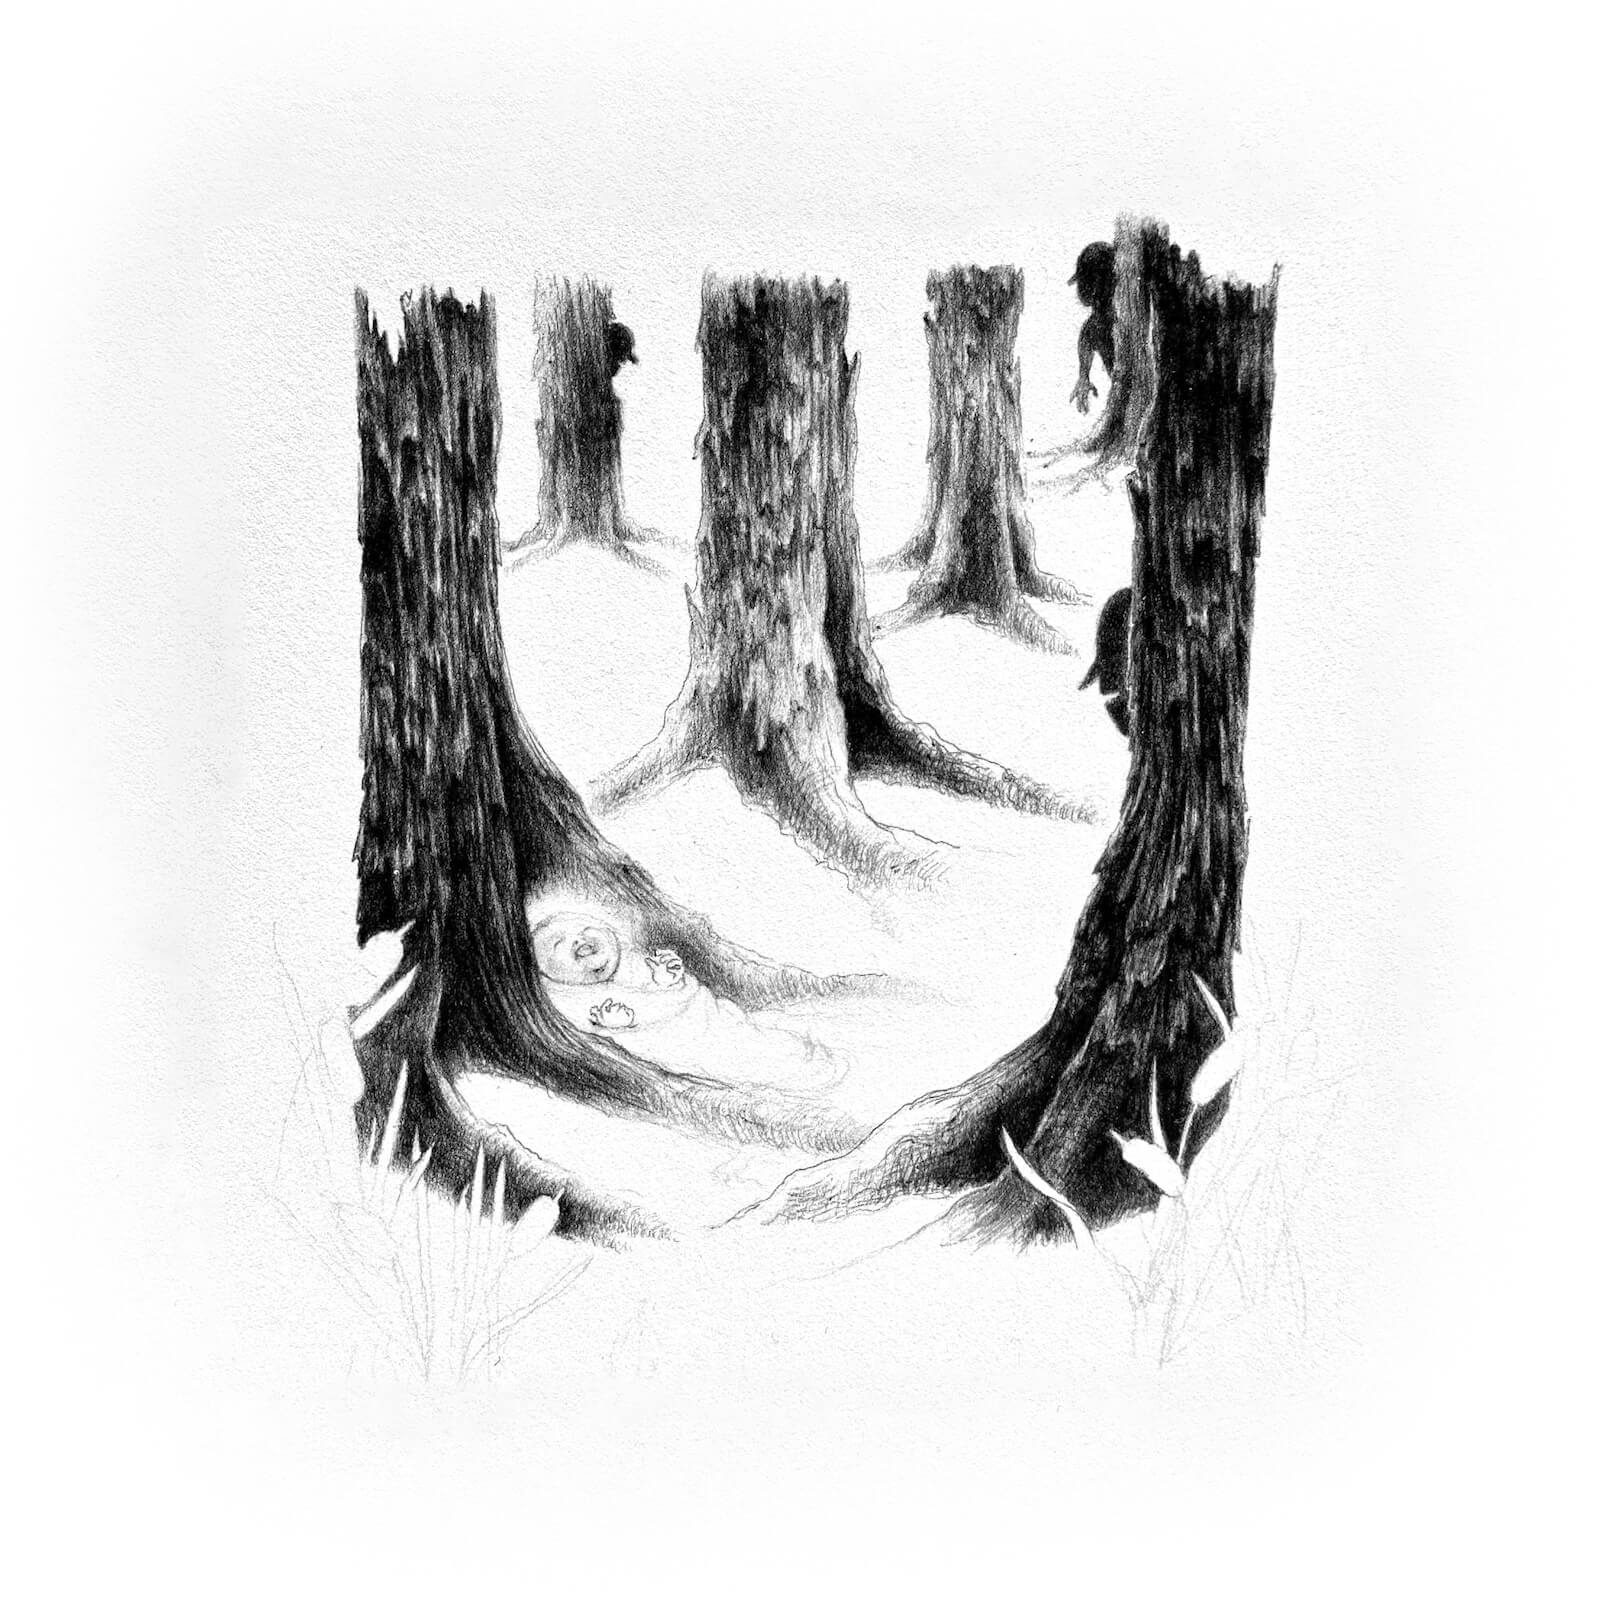 Scene 8:
Outside, the woods: we’re among trunks with ragged scales of bark, shorn before the branches.

Scanning over the image with the x-ray widget, we find hidden figures: a crying baby has been left nestled in the roots of a northern oak. Shadows of curious faces peek out from behind the trees and cattail reeds. They’re quieting each other, waiting. 